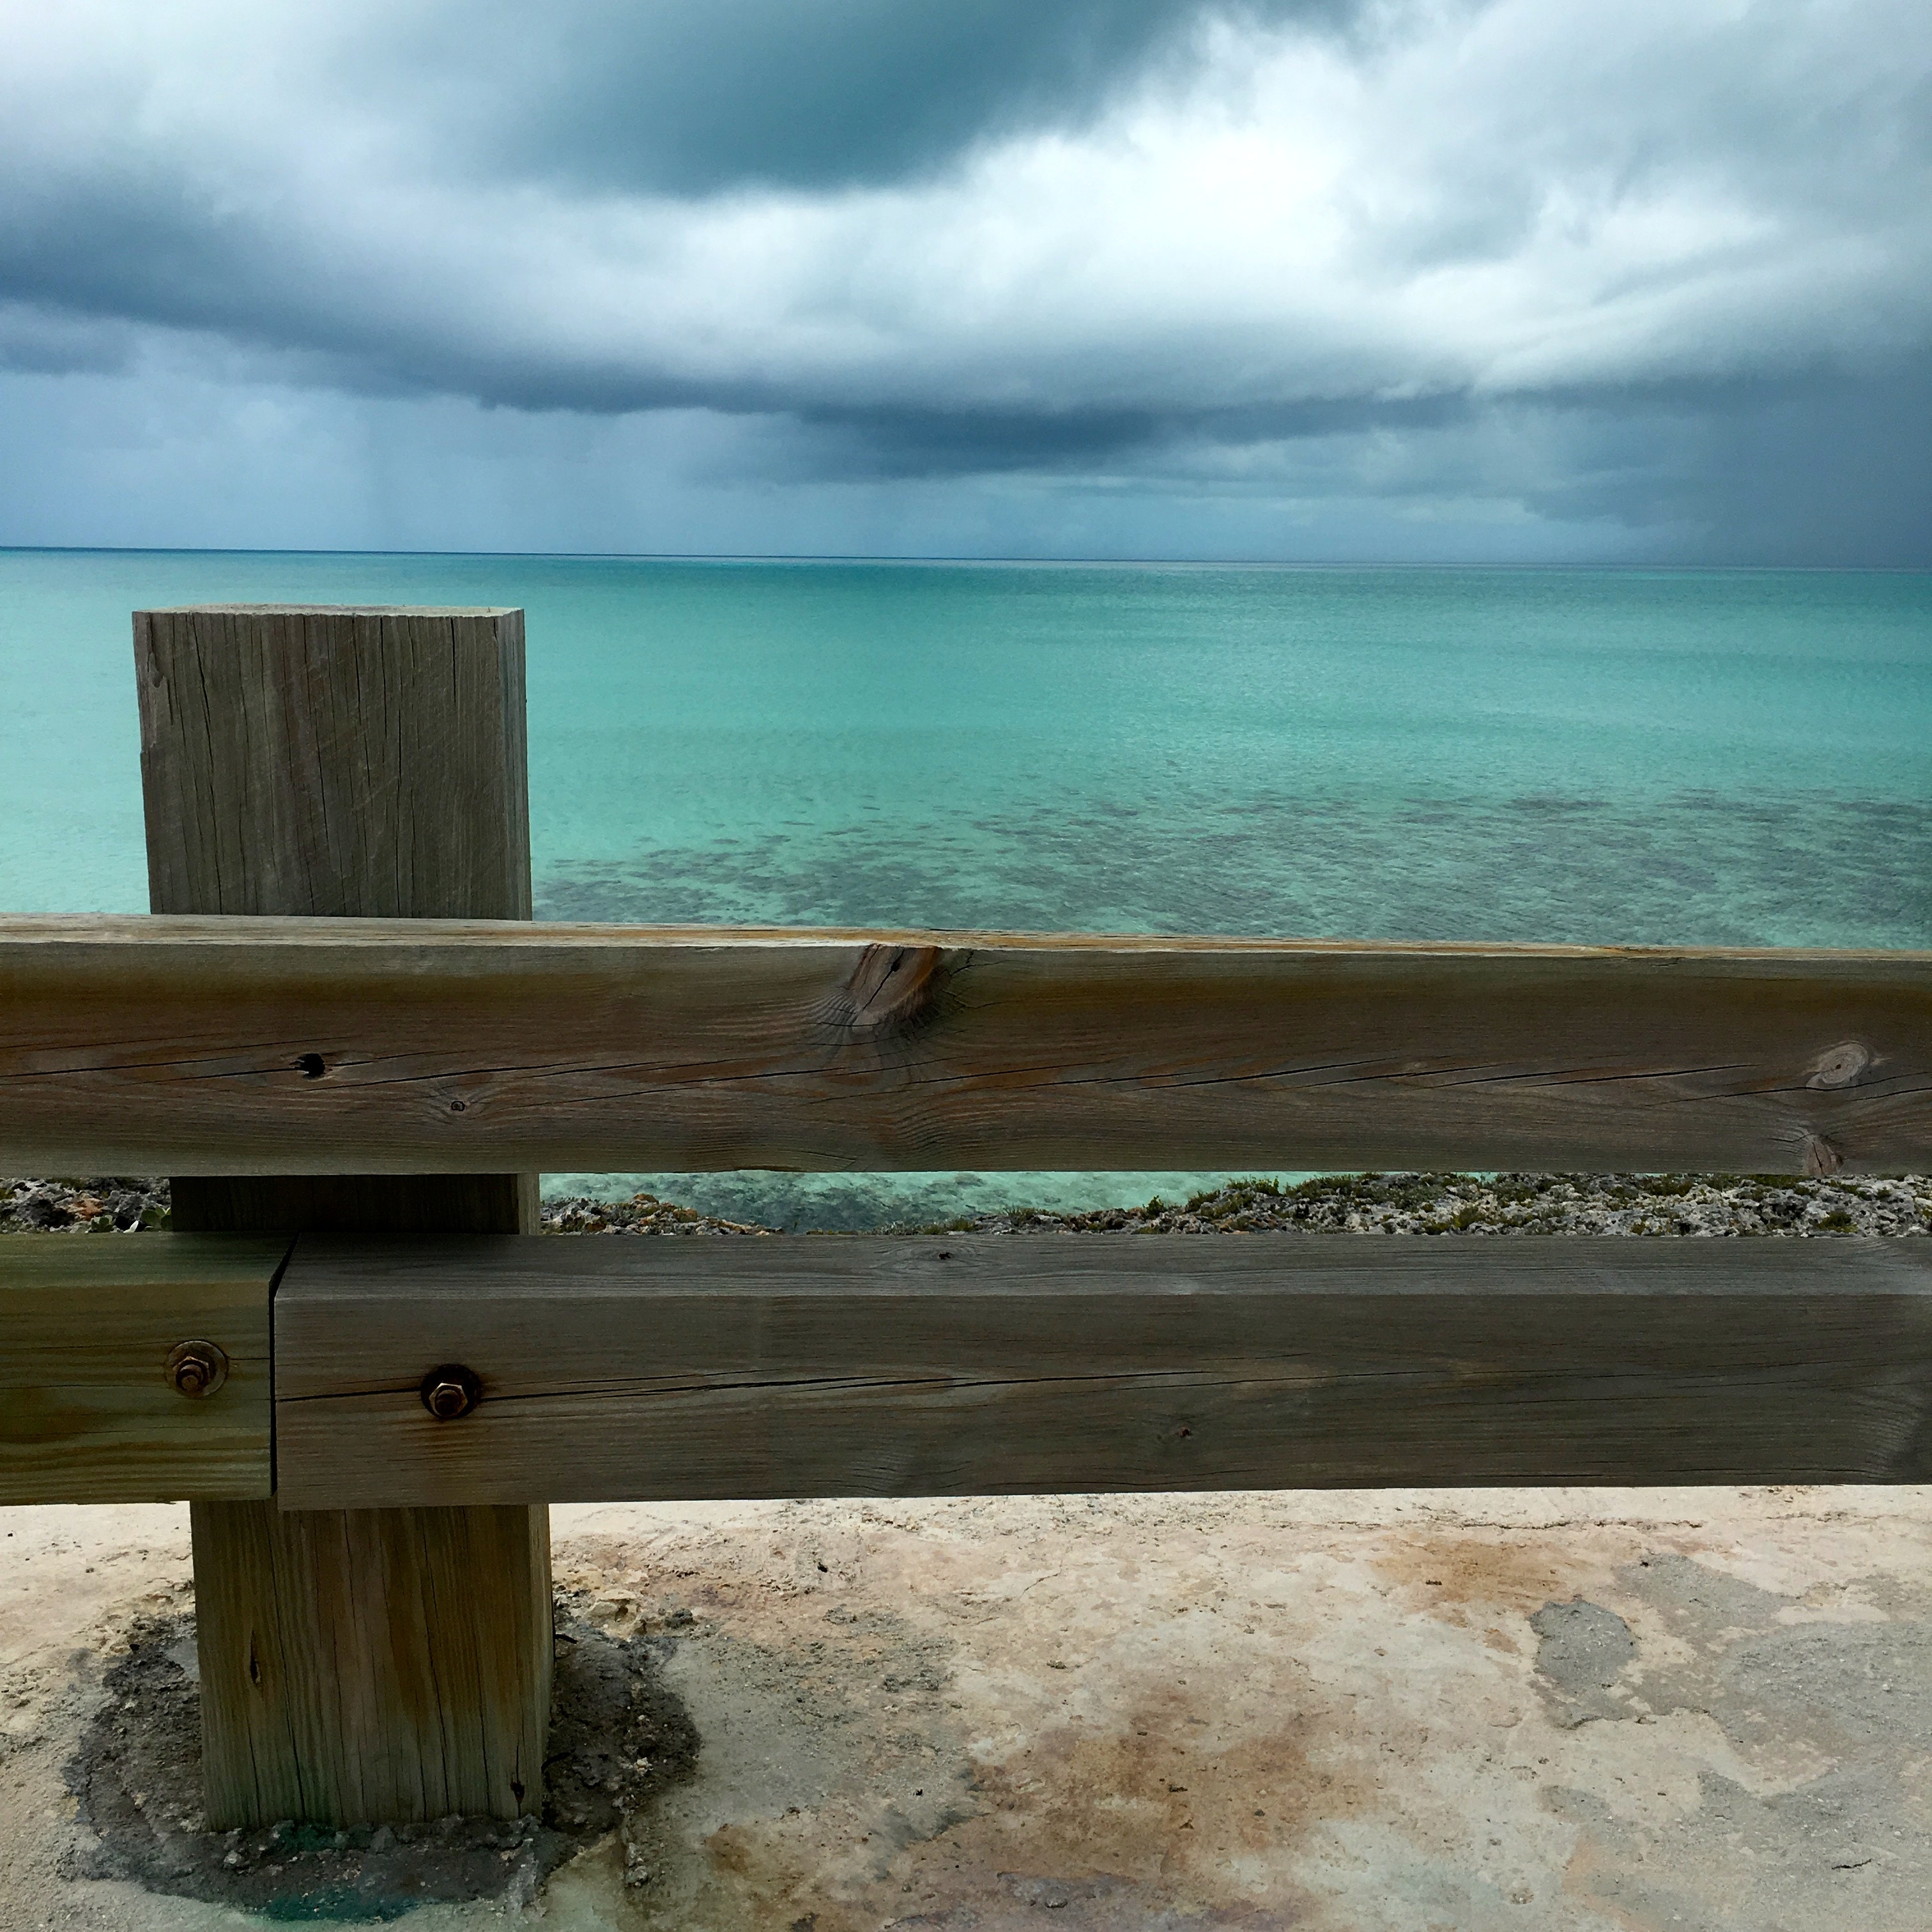 Brown wooden fence near blue ocean water under white cloudy sky during daytime photo